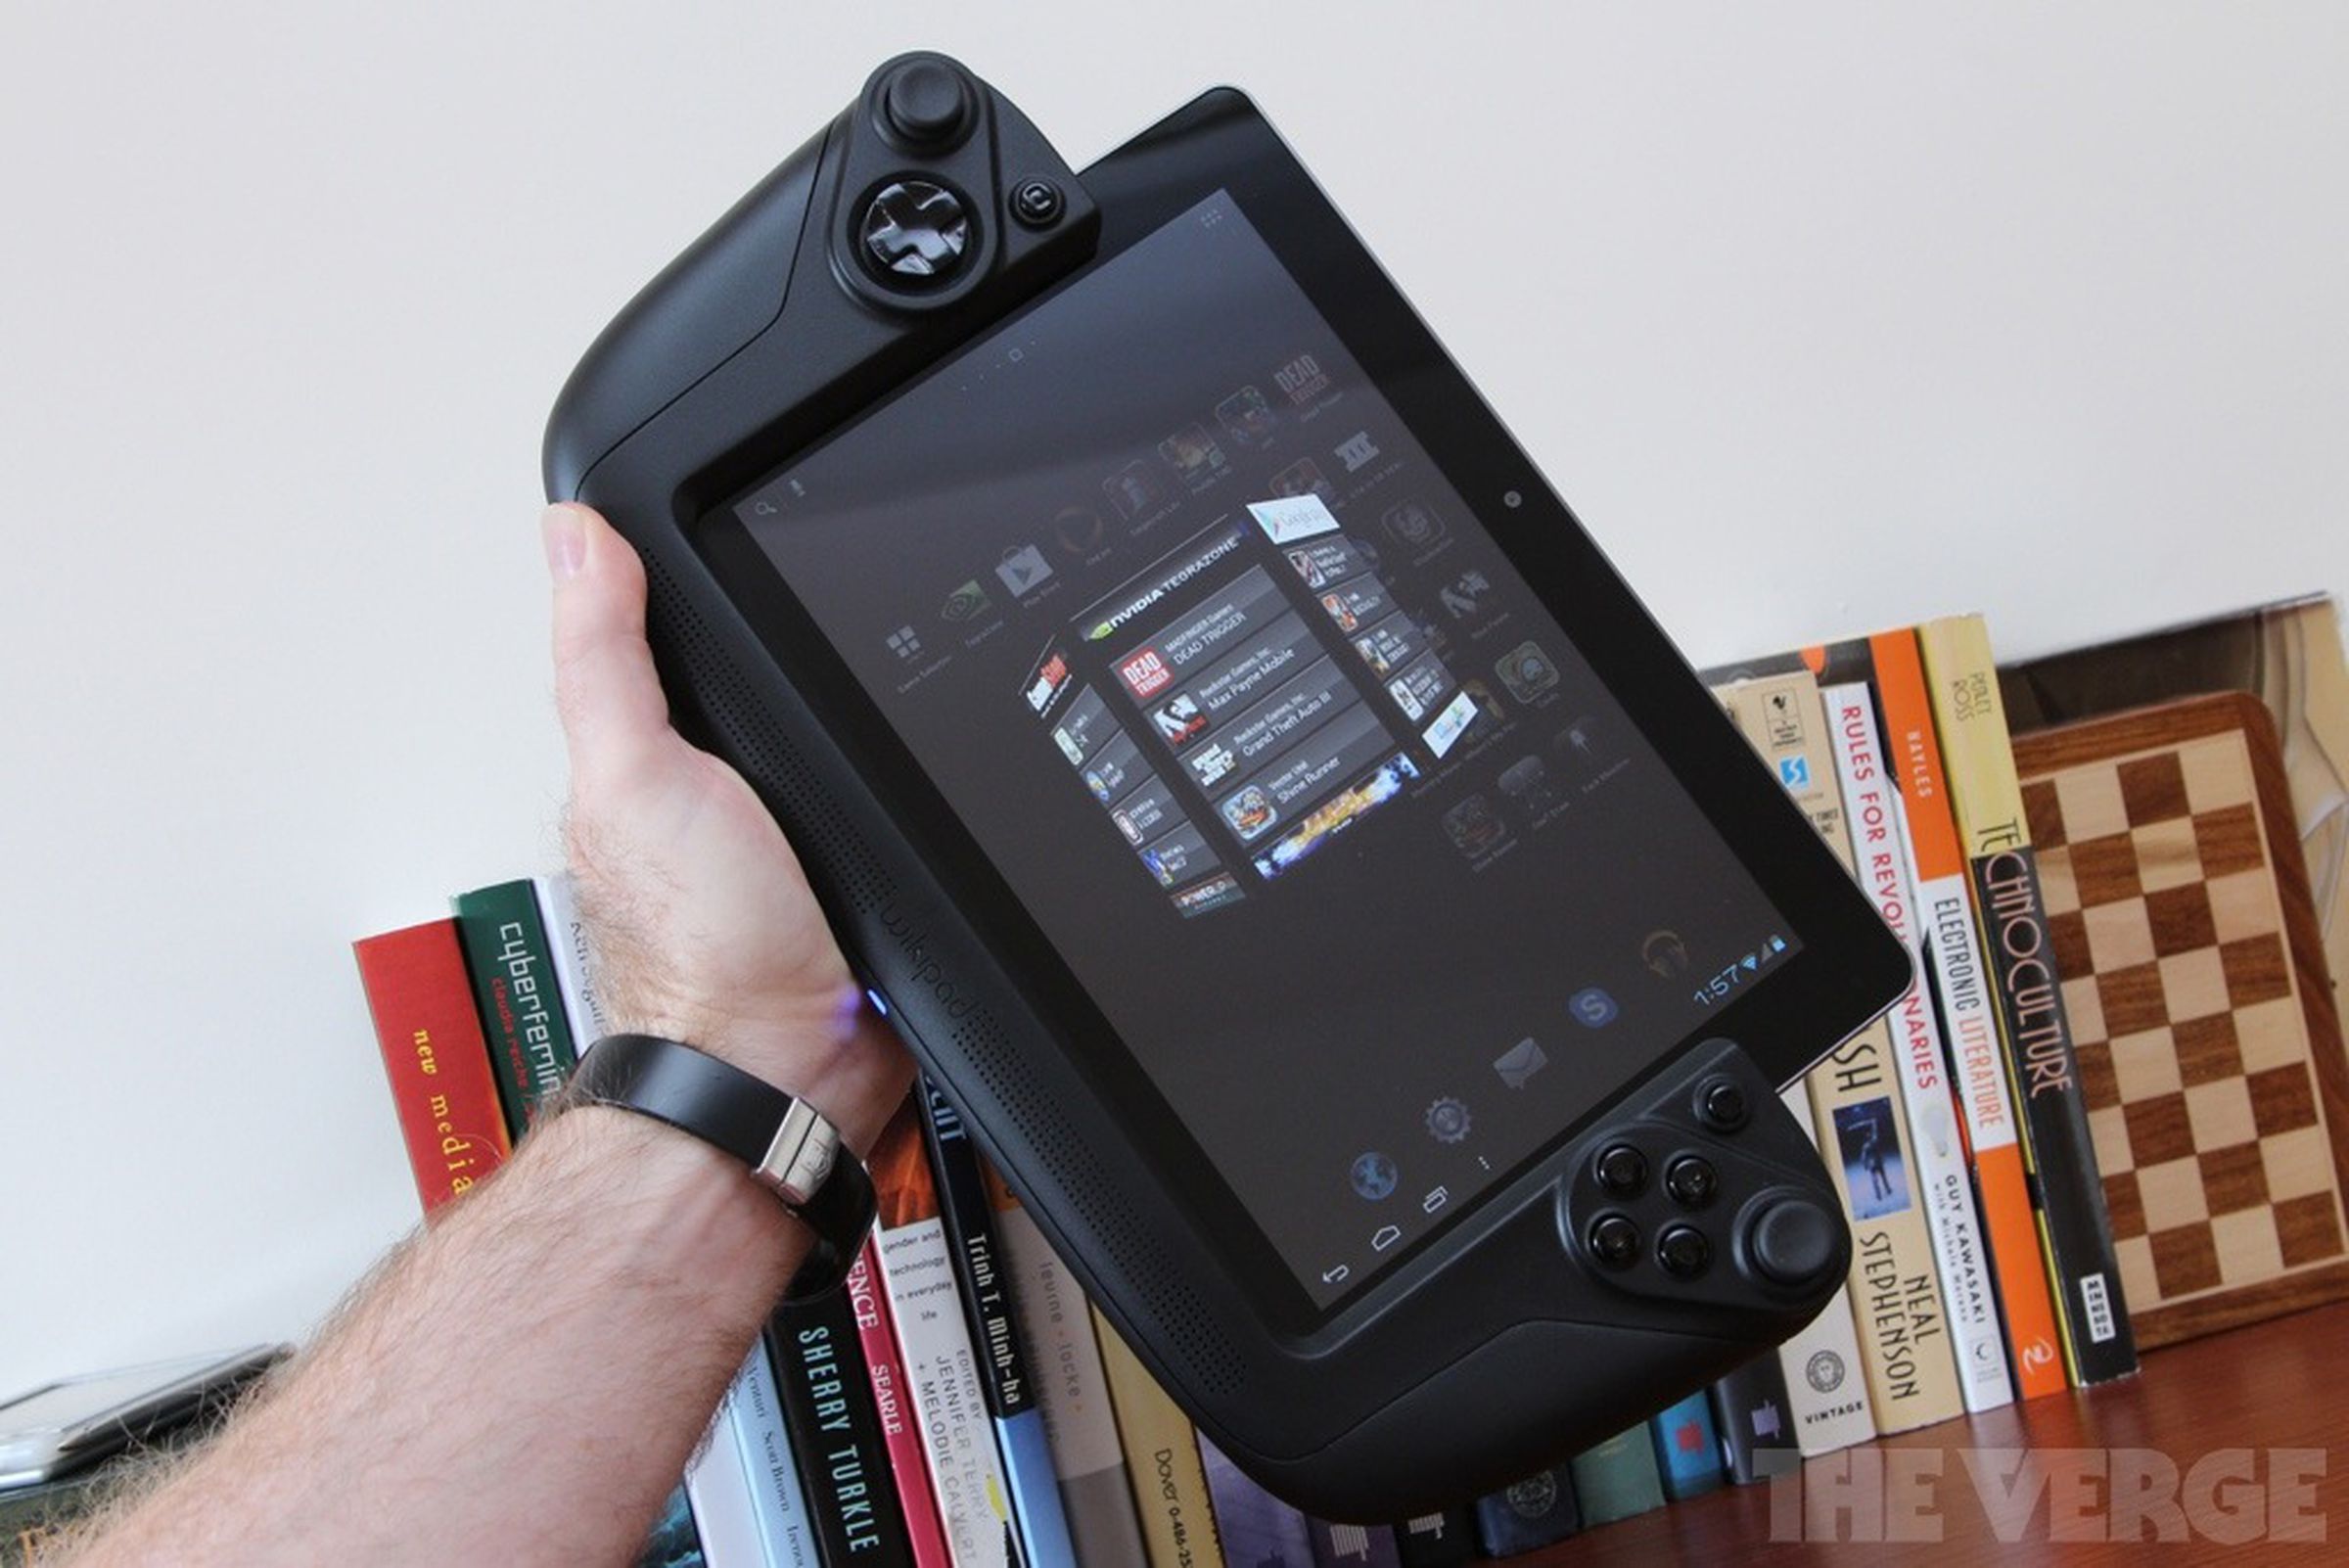 Wikipad gaming tablet hands-on pictures